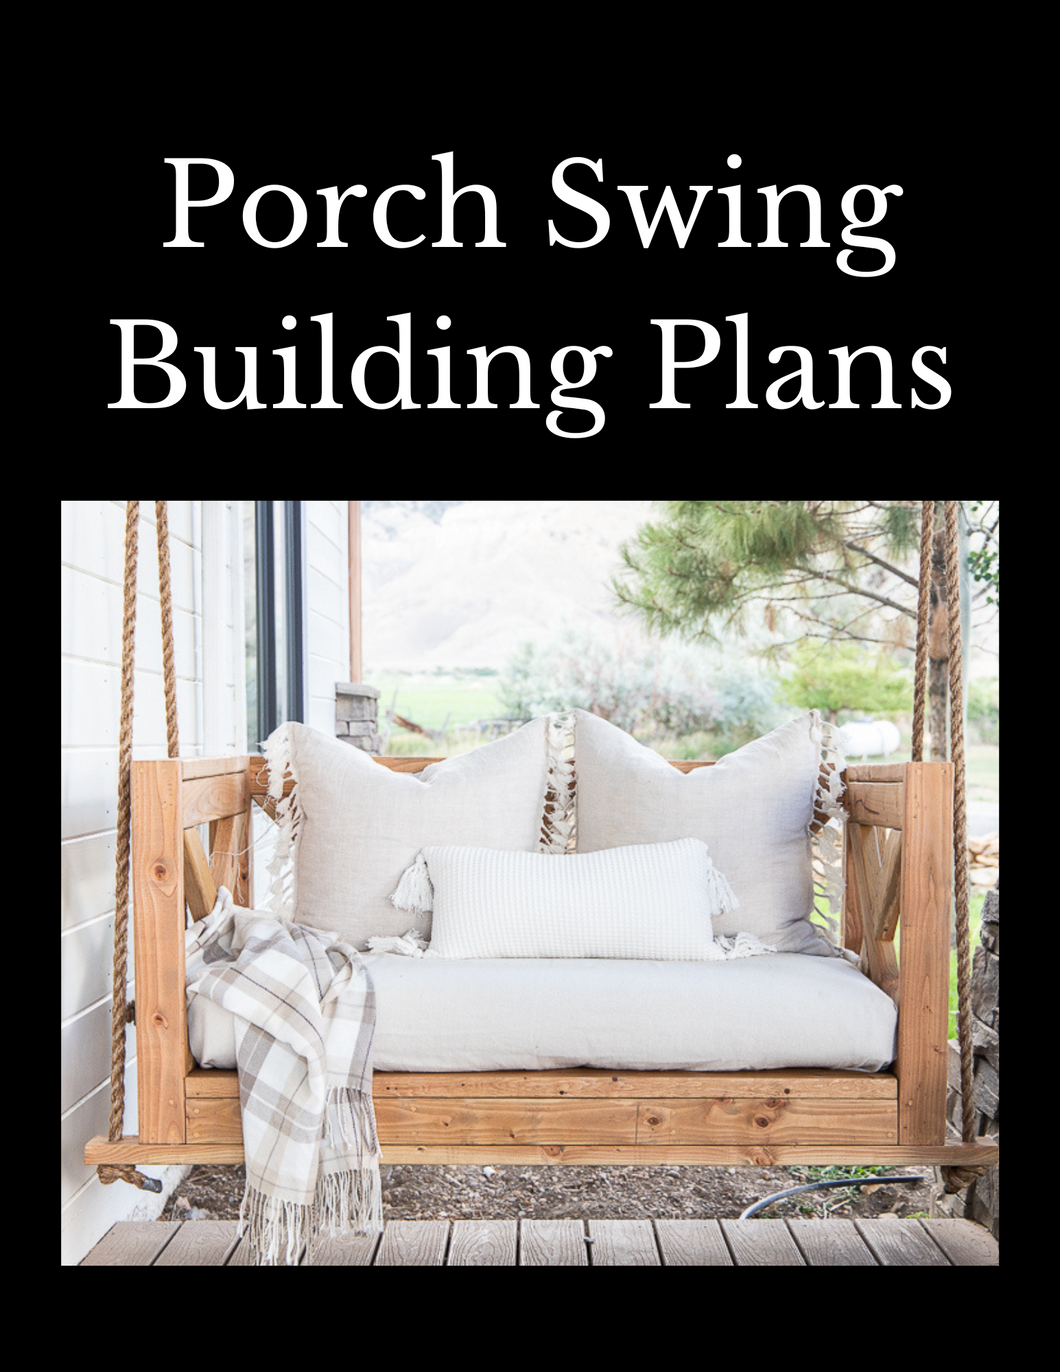 DIY Porch Swing Templates  Build Your Own Porch Swing